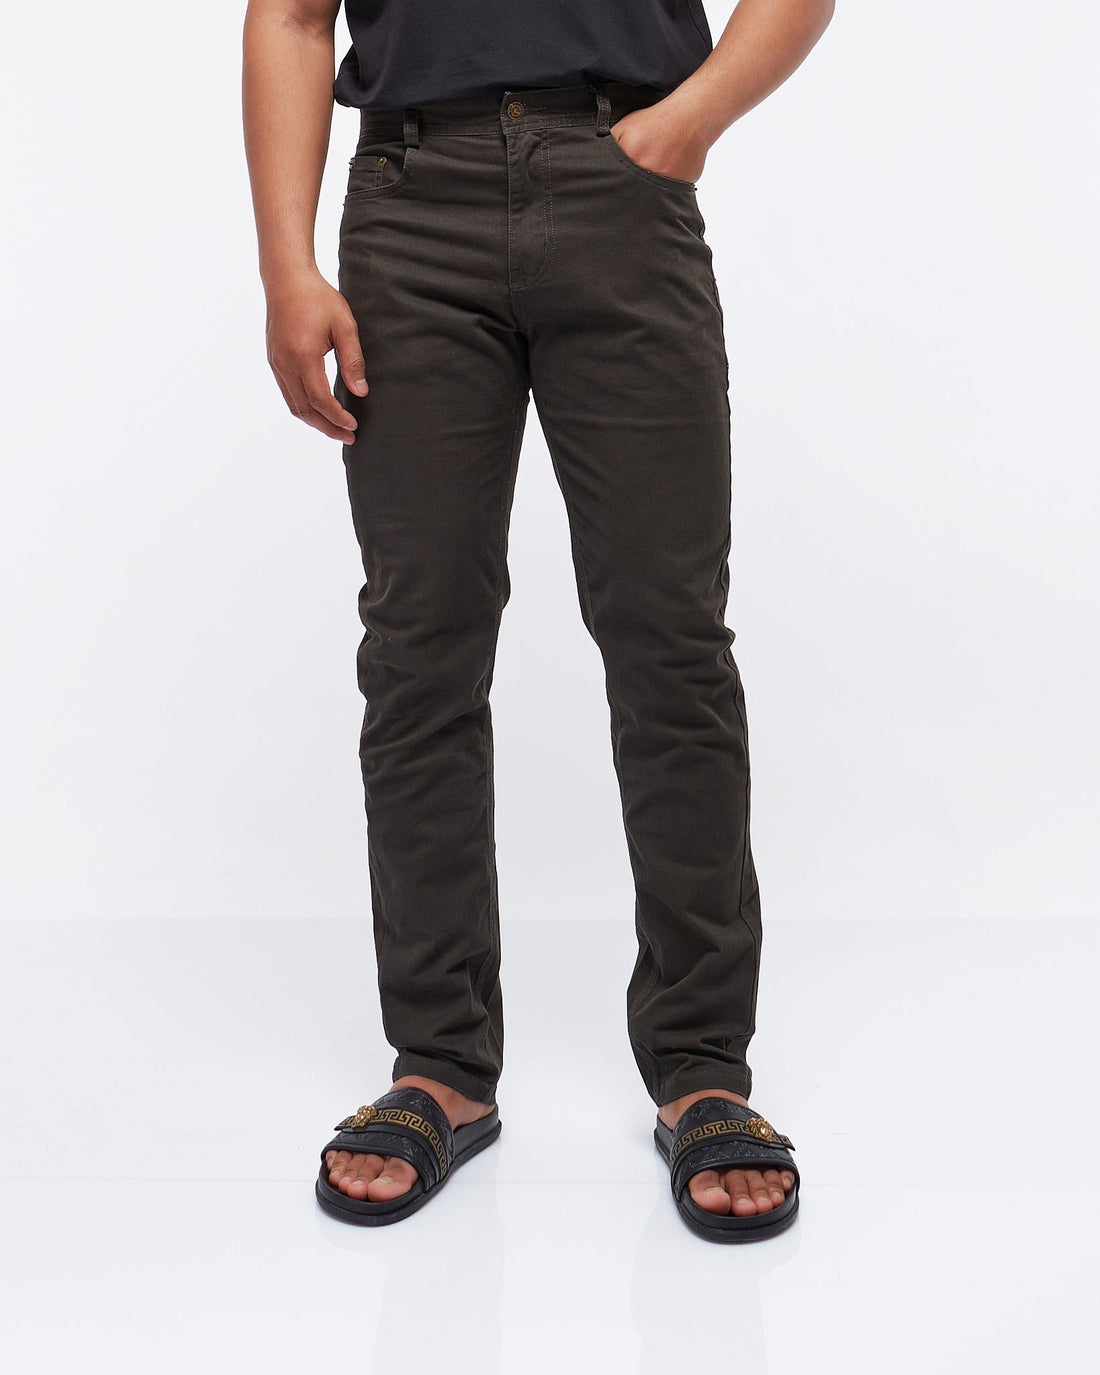 MOI OUTFIT-Solid Color Stretchy Men Jeans 23.90